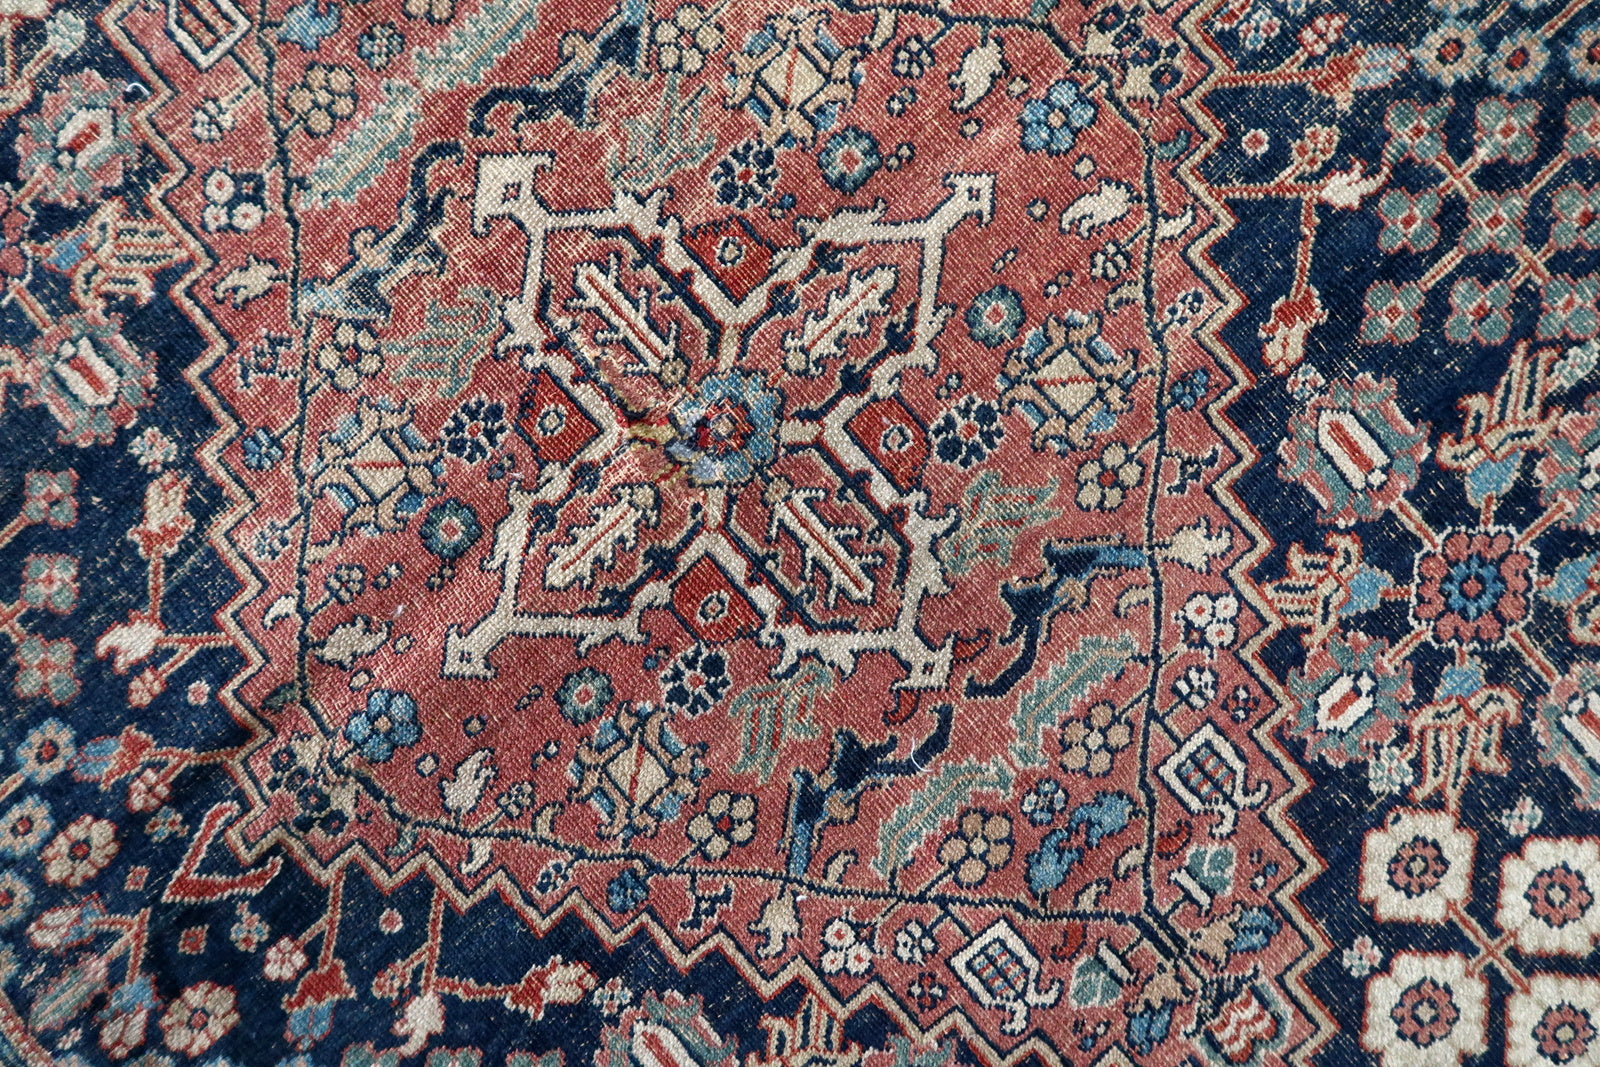 Handmade antique Persian Jozan rug in traditional design and night blue color. The rug is from the beginning of 20th century in distressed condition. On the sign it says 1335 year by Islamic calendar, it is 1915th year.